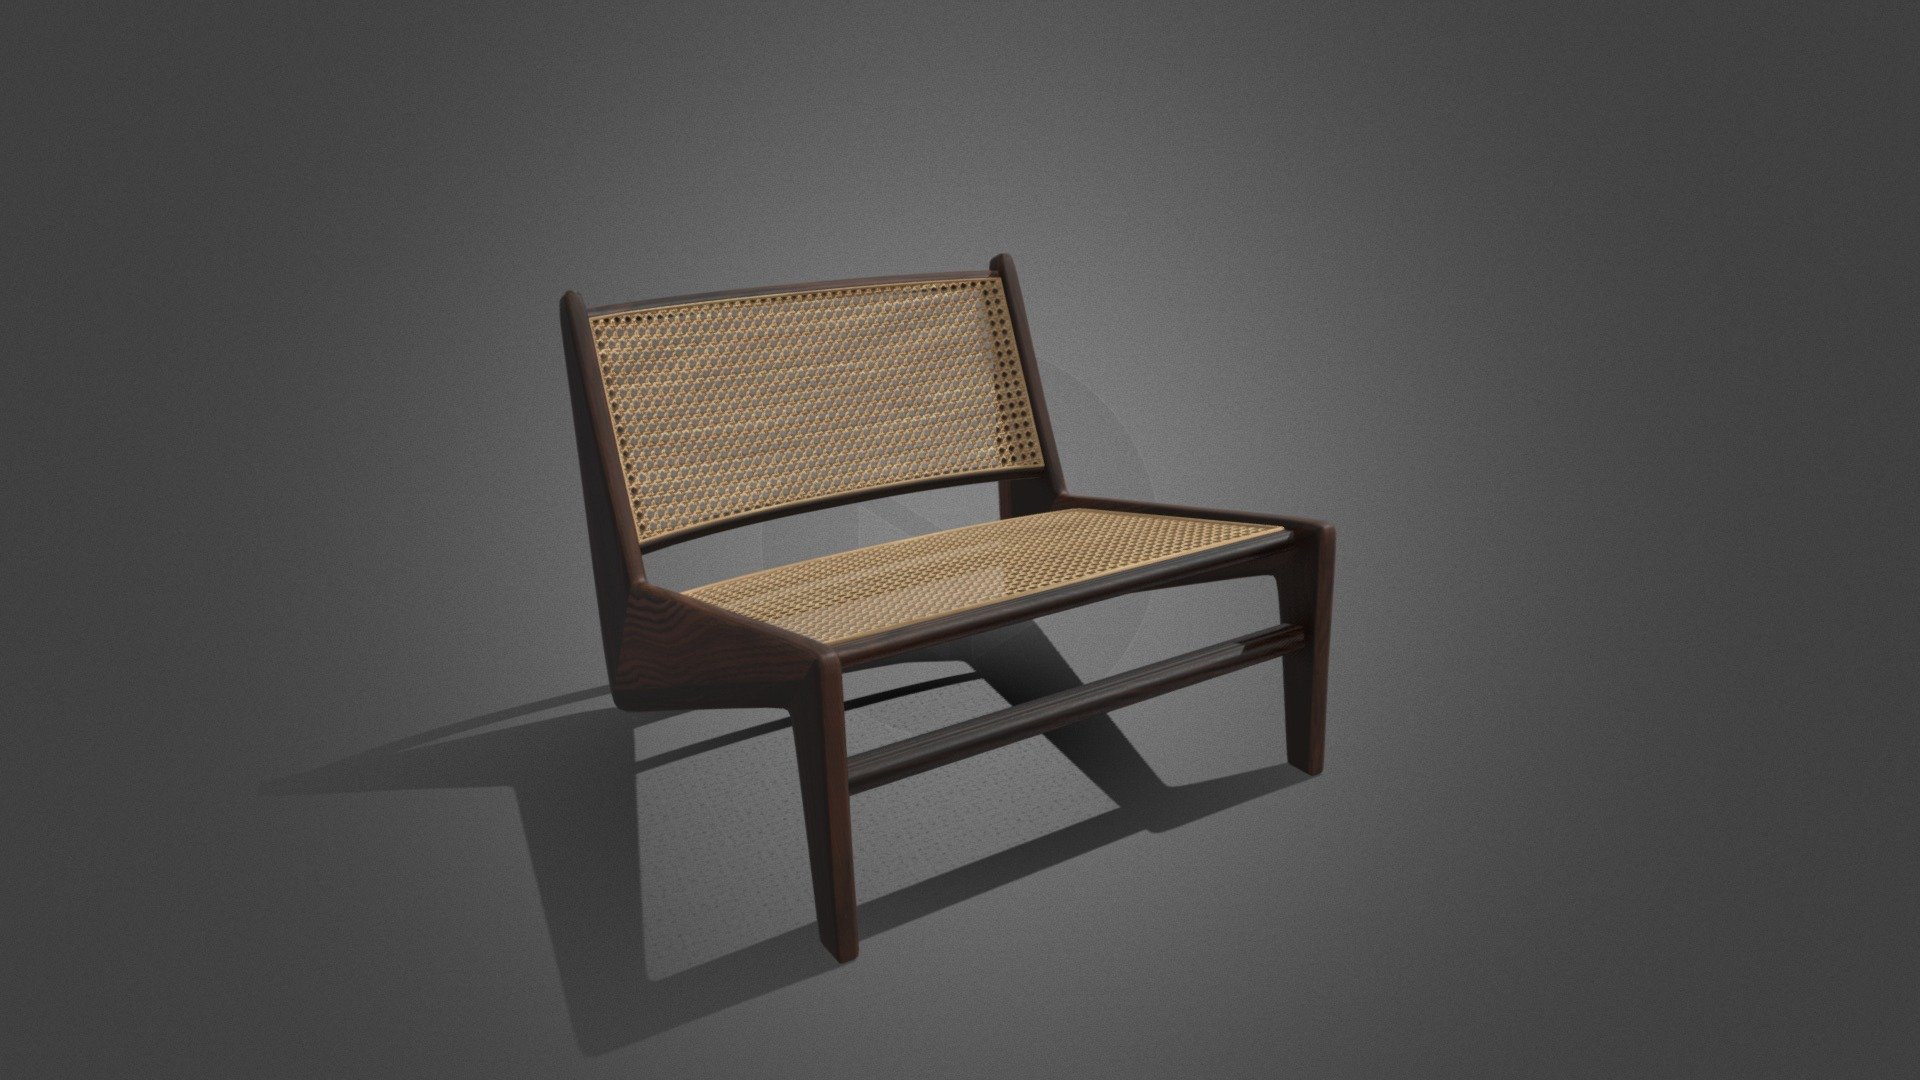 3d model of a Jeanneret Kangaroo Chair. 




This product is made in Blender and ready to render in Cycle. Unit setup is metres and the models are scaled to match real life objects. 




The model comes with textures and materials and is positioned in the center of the coordinates system.




No additional plugin is needed to open the model.




Notes:




Geometry: Polygonal




Textures: Yes 




Rigged: No




Animated: No




UV Mapped: Yes




Unwrapped UVs: Yes, non-overlapping




Bake normal map




Note: don't forget to take a few seconds to rate this product, your support will allow me to continue working .



Thanks in advance for your help and happy blending!




Hope you like it! Thank you!

My youtube channel : https://www.youtube.com/toss90 - Jeanneret Kangaroo Chair - Buy Royalty Free 3D model by Toss90 3d model